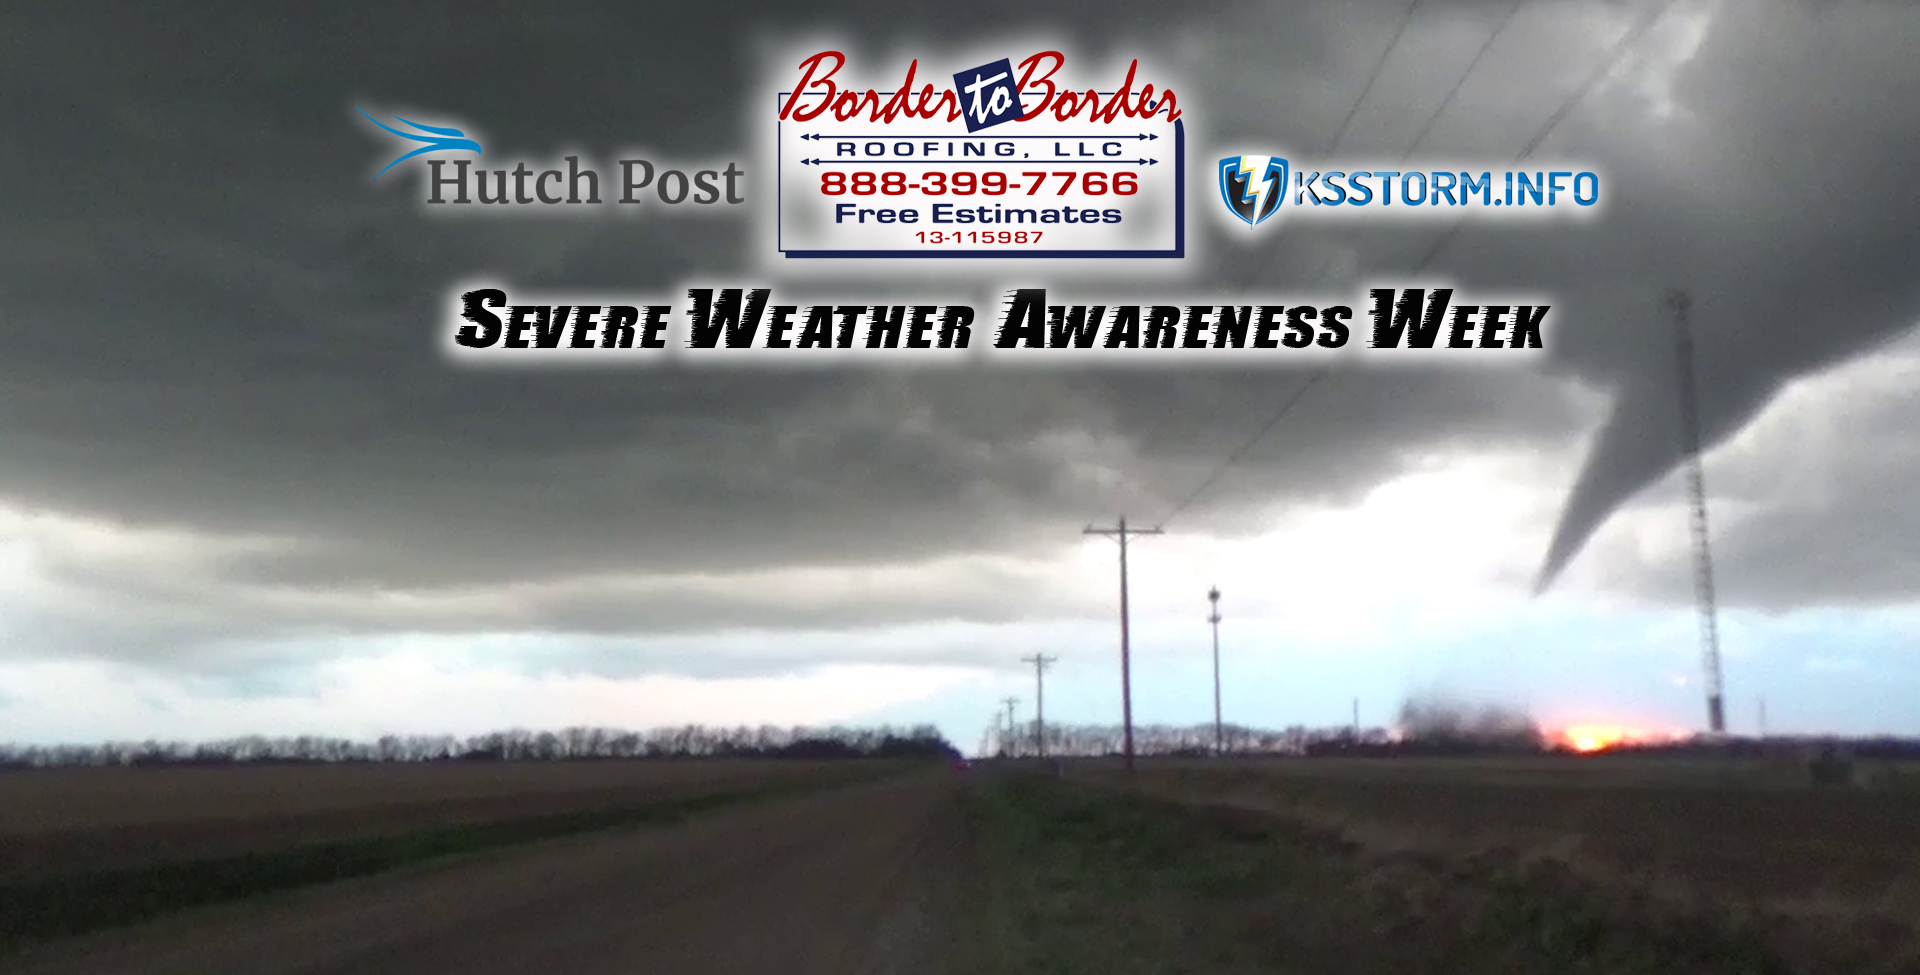 23 severe weather awareness week friday feature banner